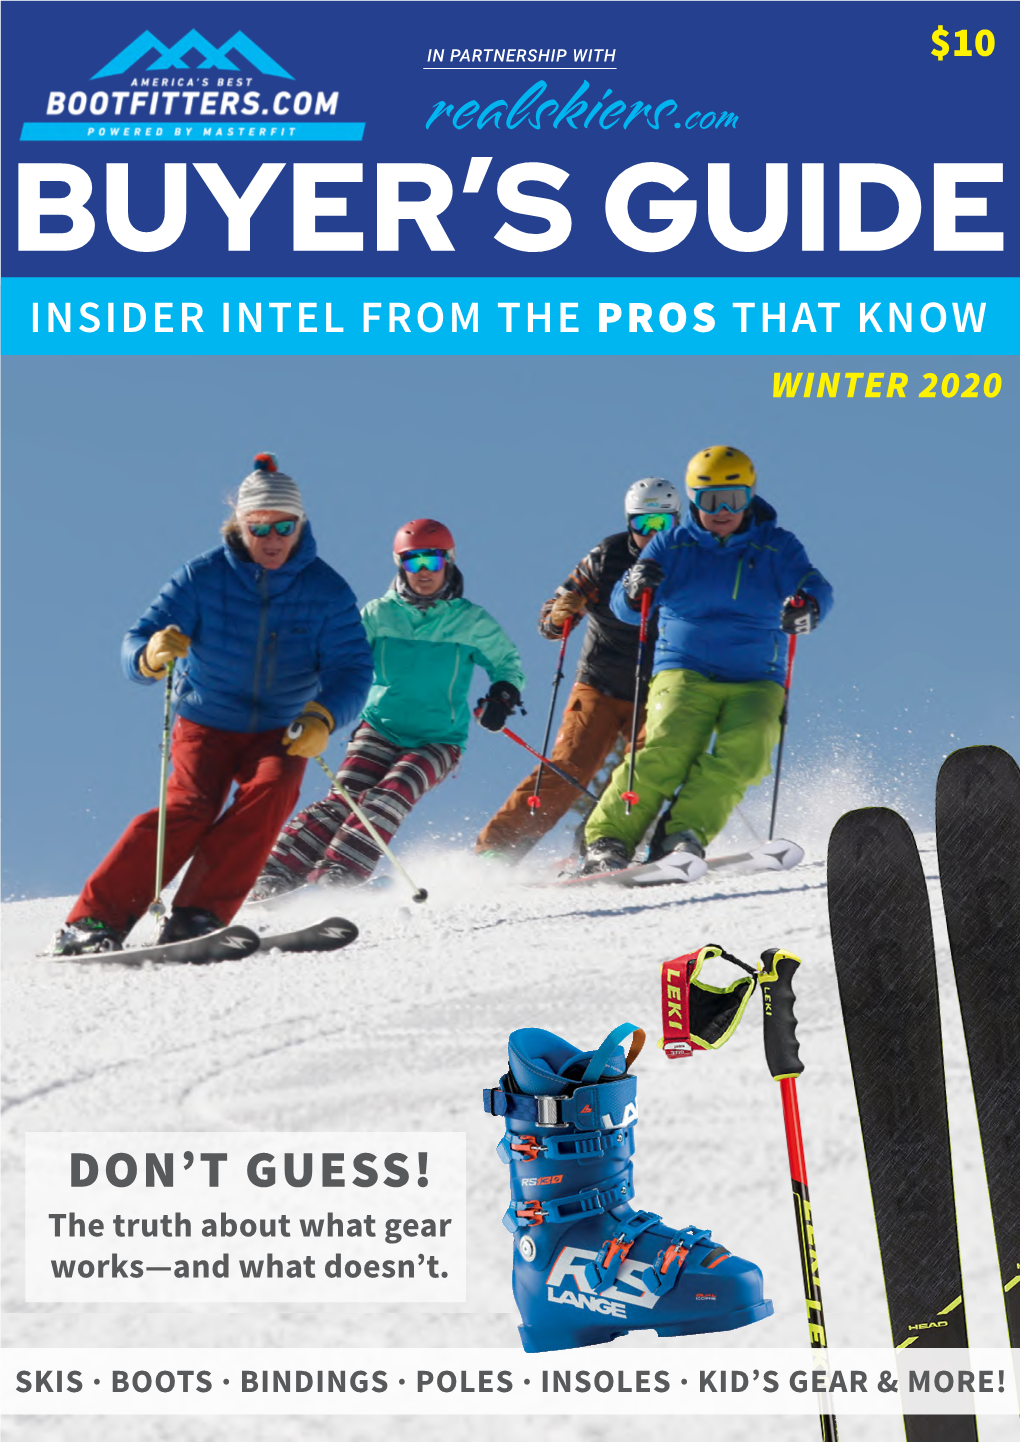 Realskiers.Com BUYER’S GUIDE INSIDER INTEL from the PROS THAT KNOW WINTER 2020